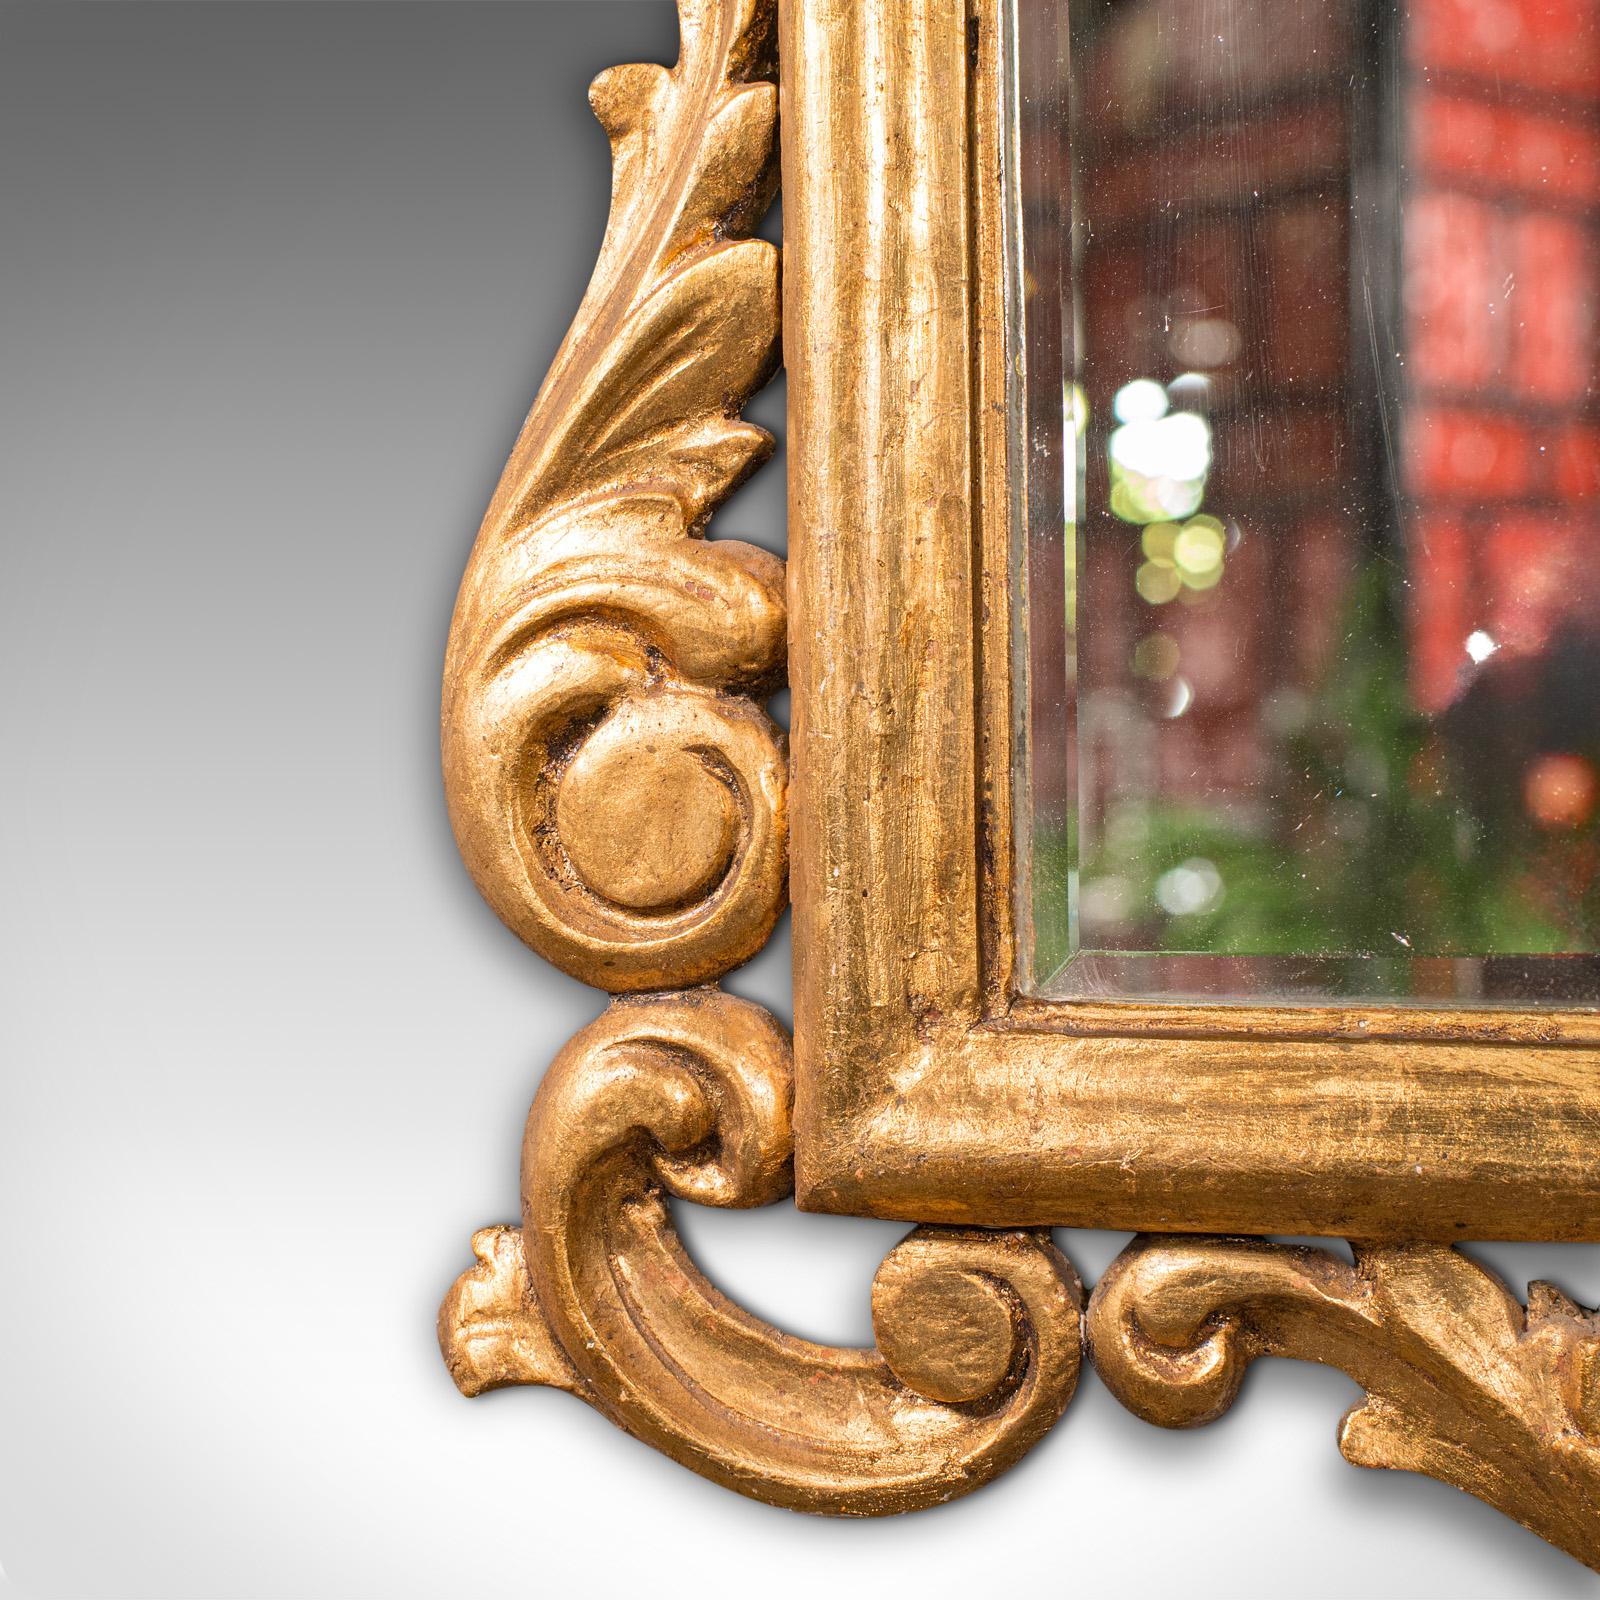 19th Century Antique Ornate Mirror, Continental, Giltwood, Glass, Hall, Overmantle, Victorian